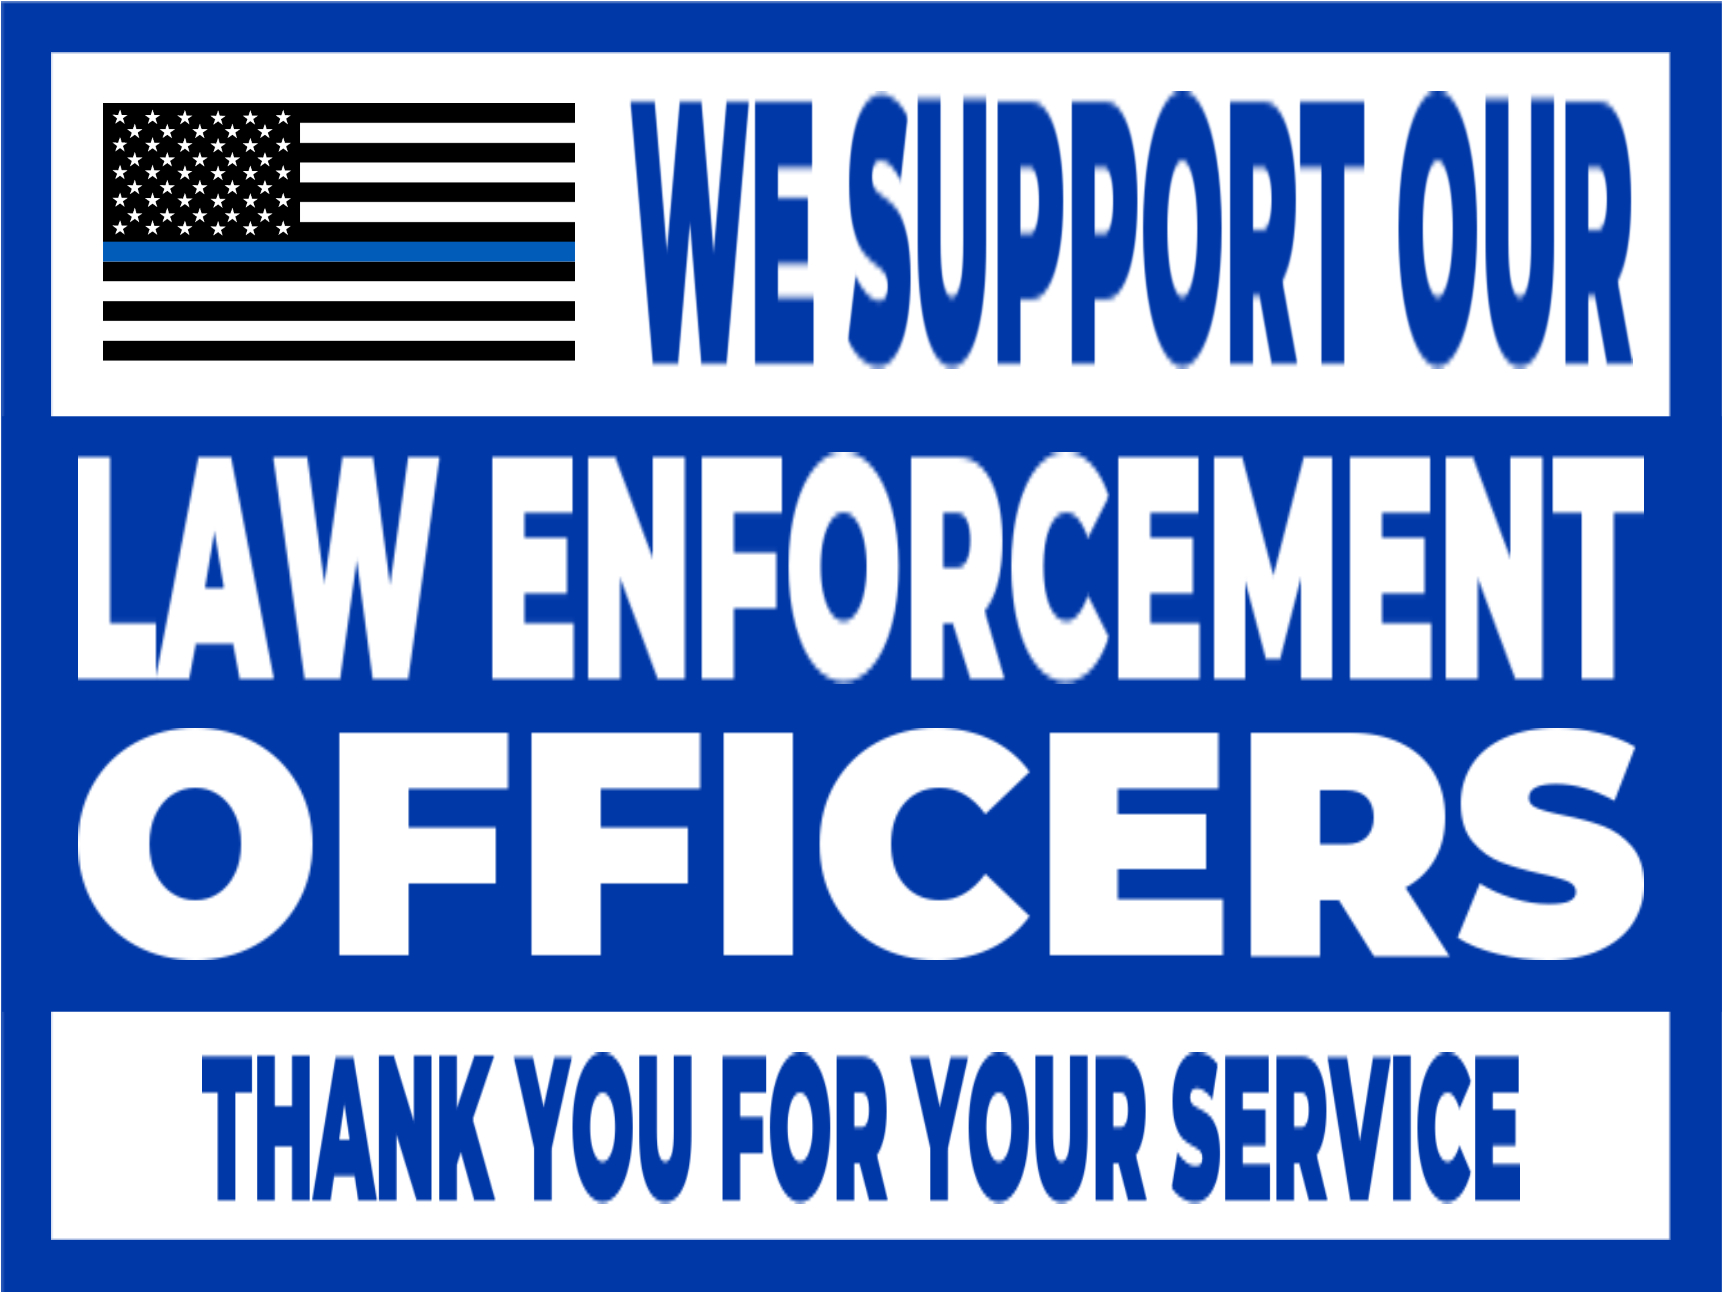 Yard Sign, Political - Tags: police, law, enforcement, support, blue, thin, blue, line, flag, thank, you, service